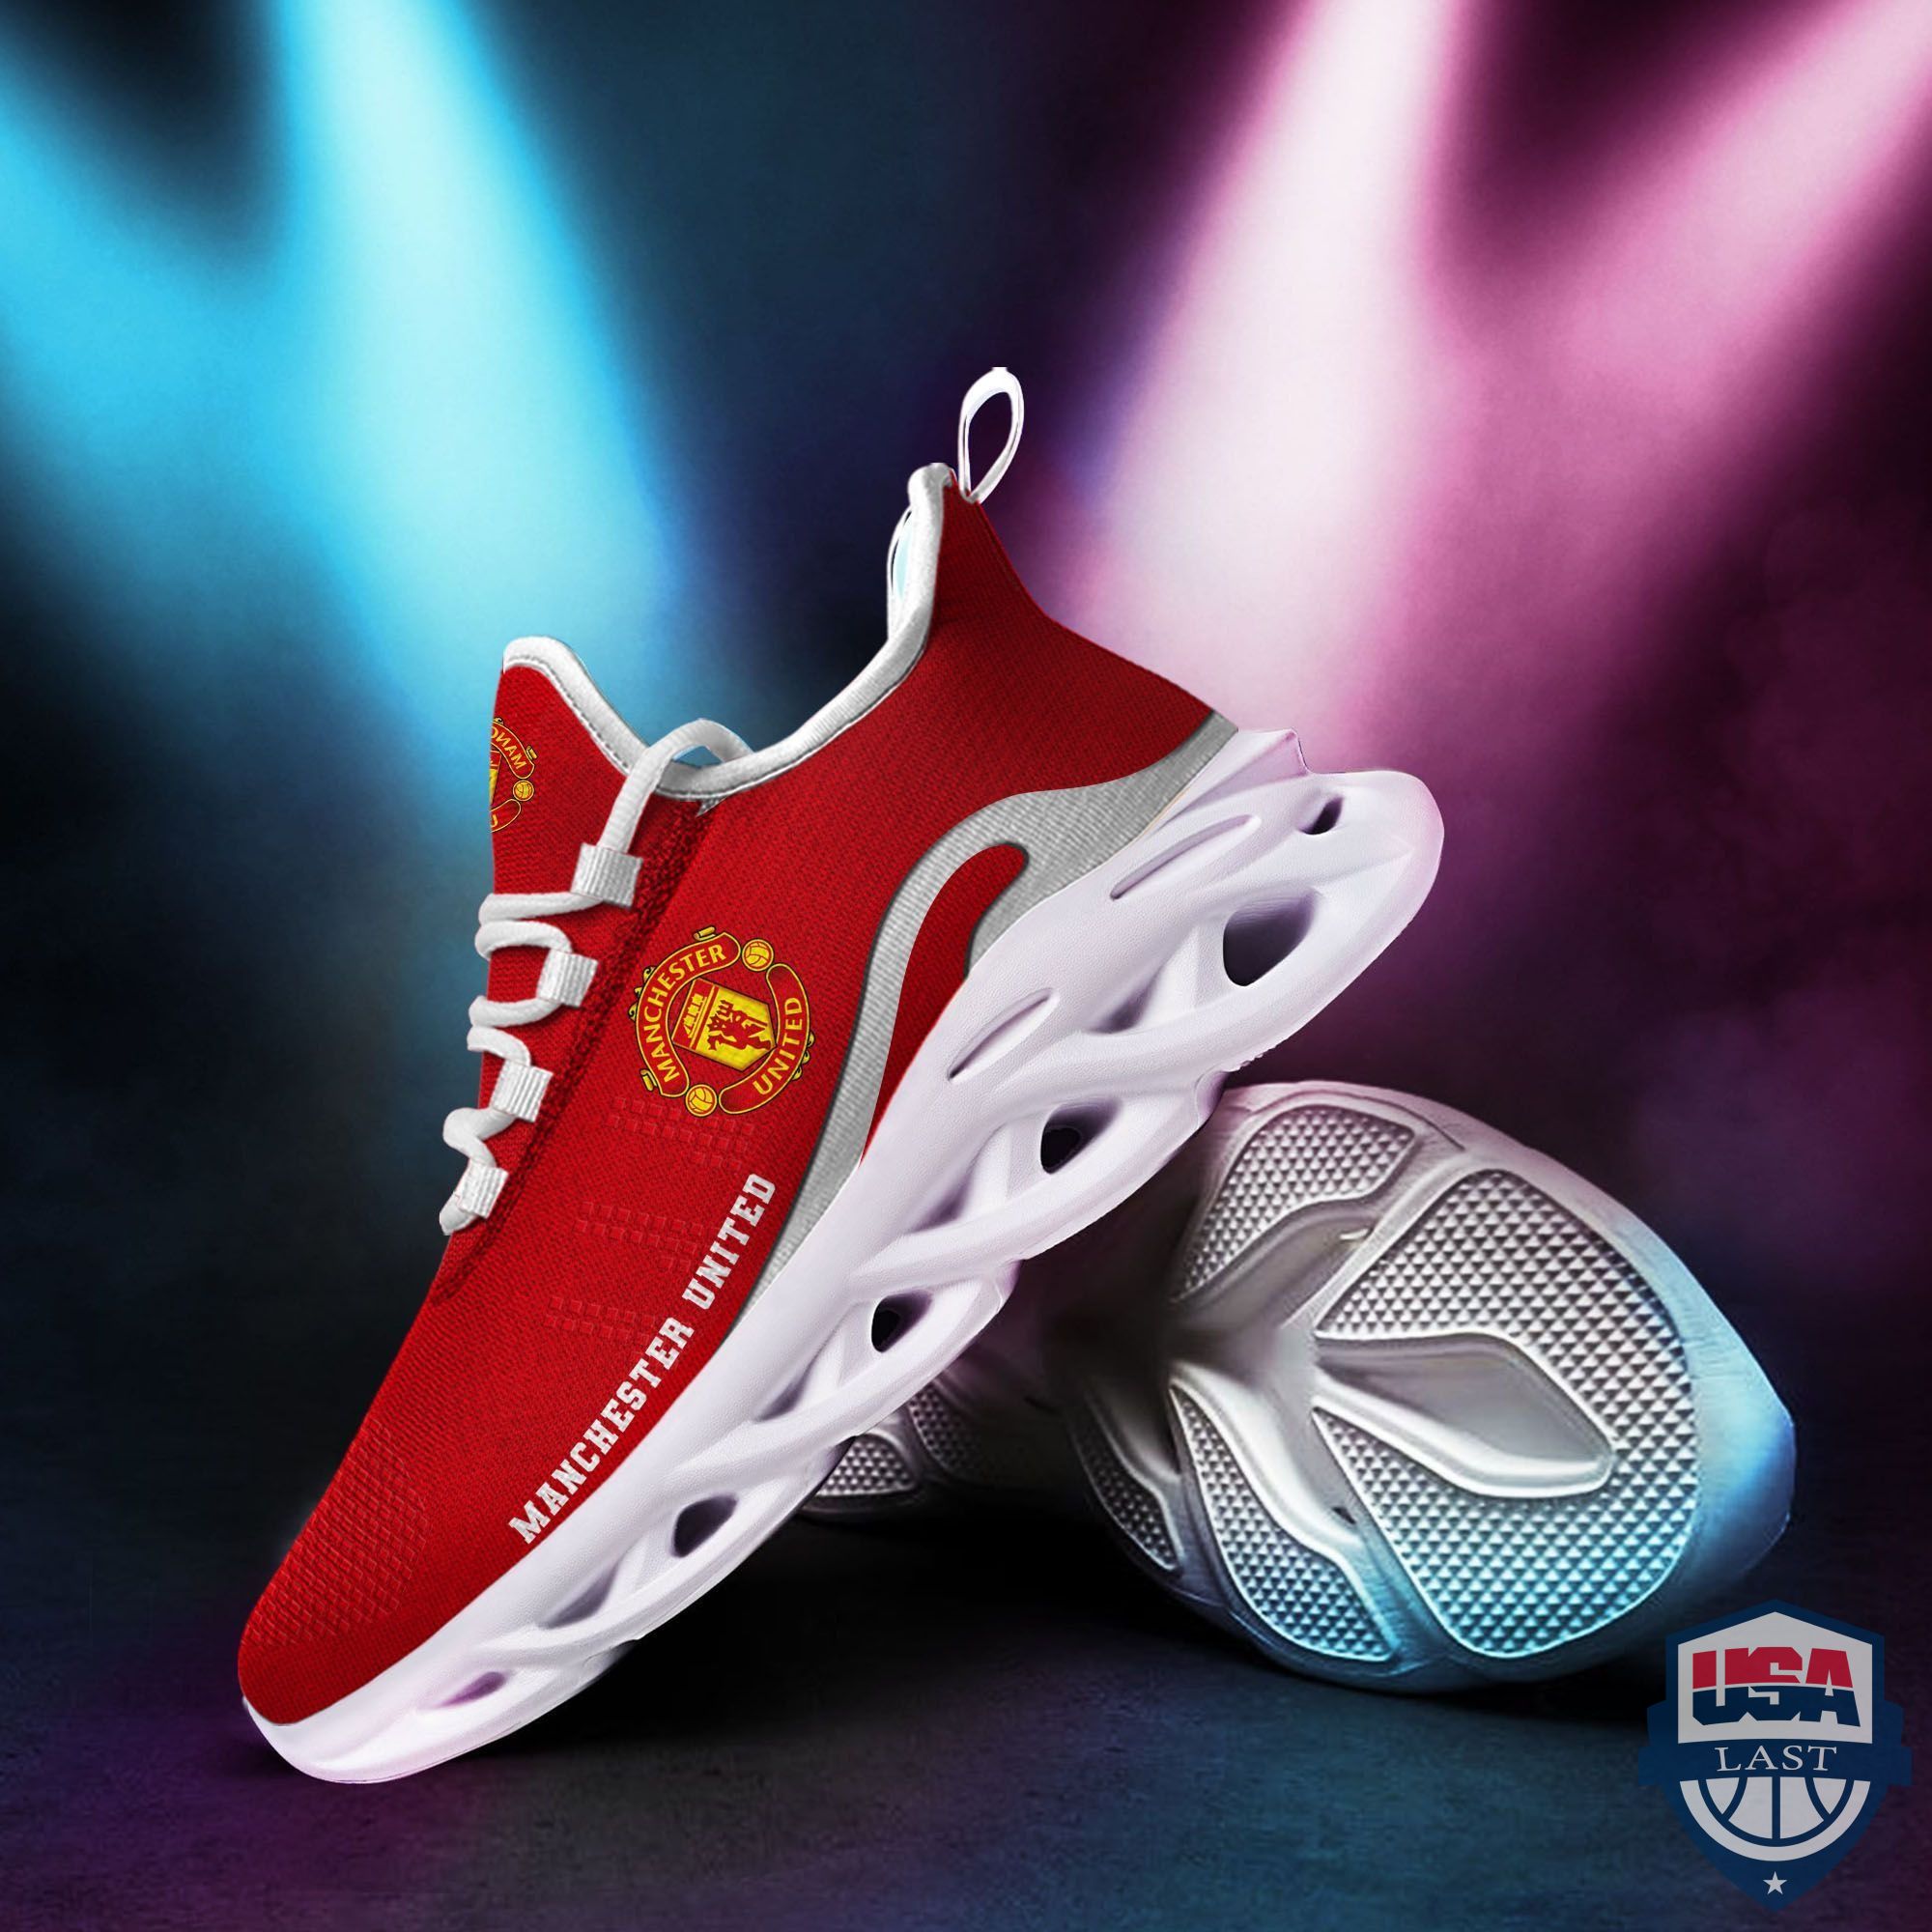 EPL Manchester United Max Soul Clunky Sneaker Shoes